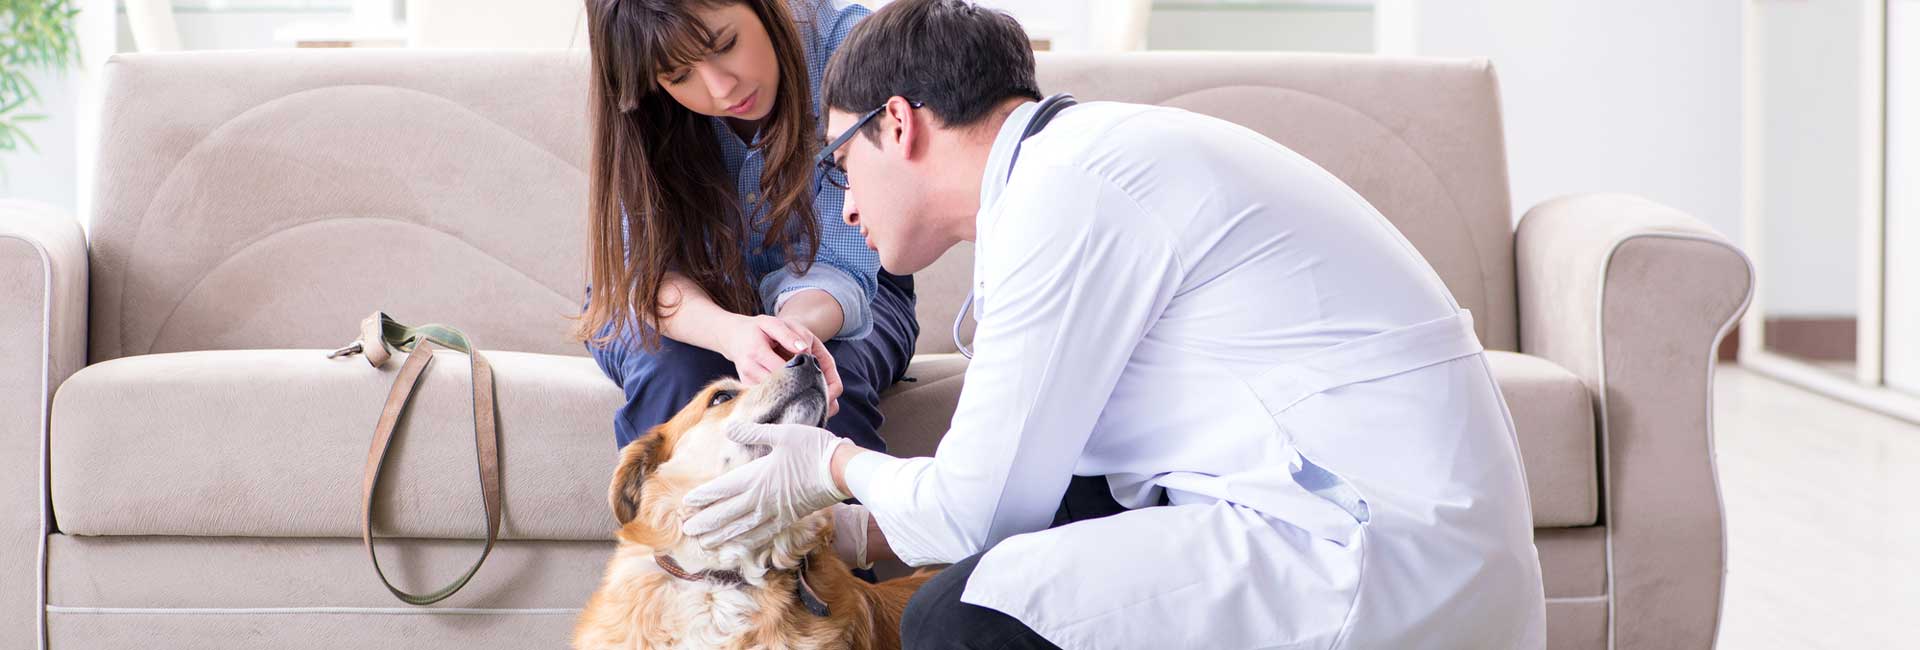 Veterinarian inspecting a dog in a house visit